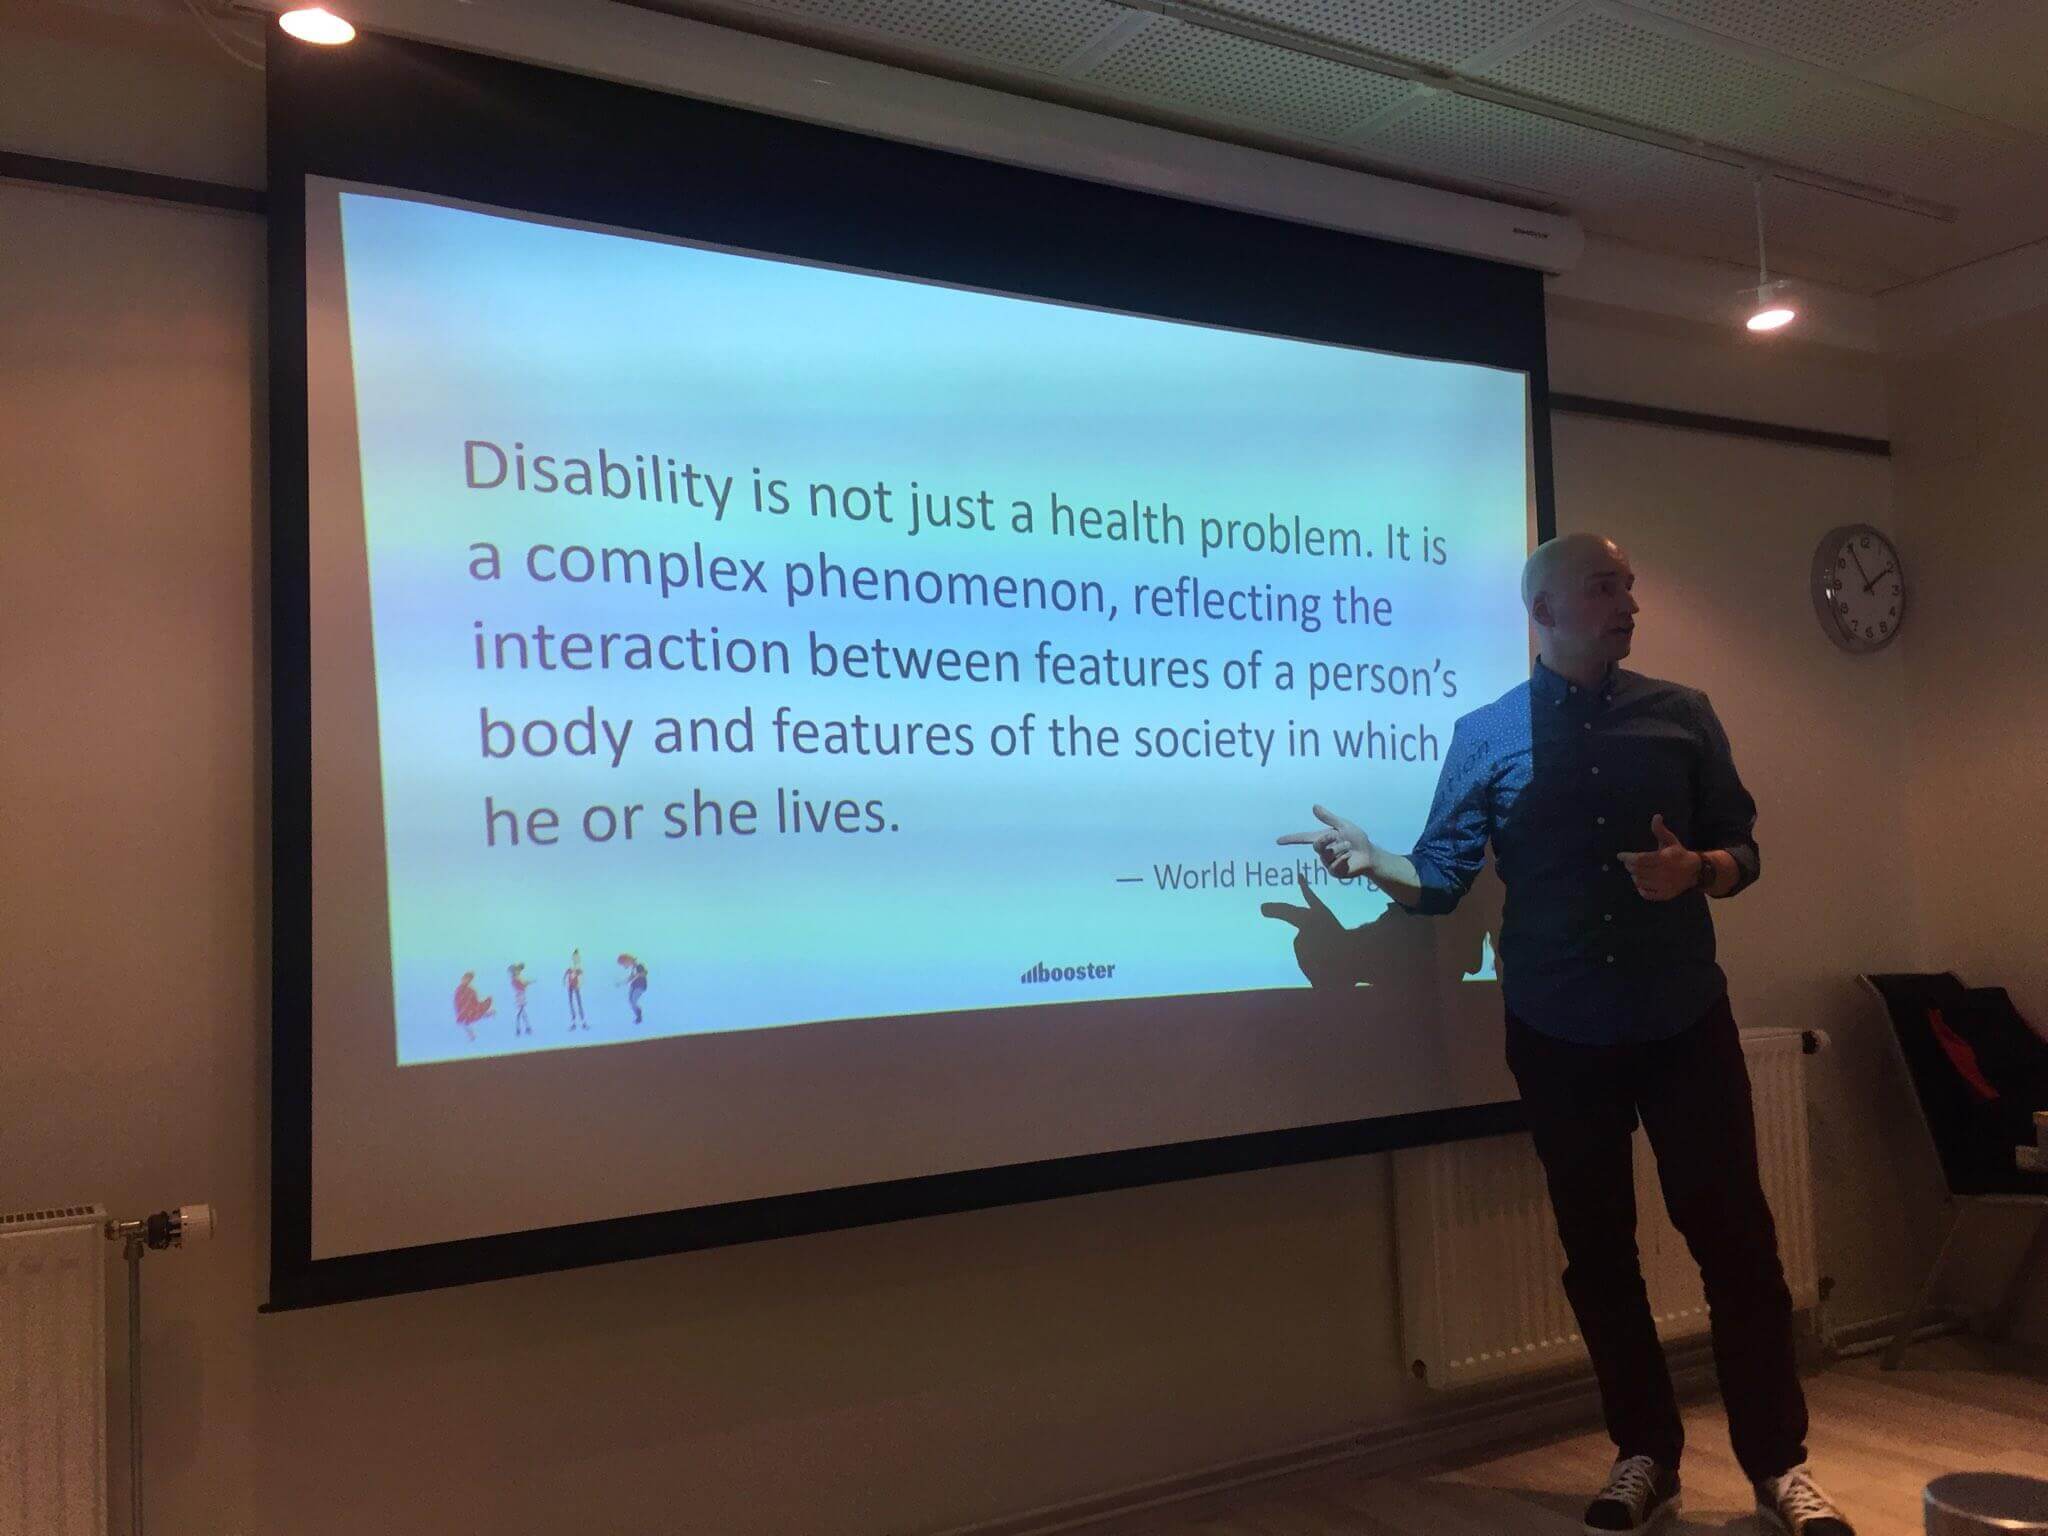 Disability is not just a health problem. It is a complex phenomenon, reflecting the interaction between features of a person’s body and features of the society in which he or she lives.